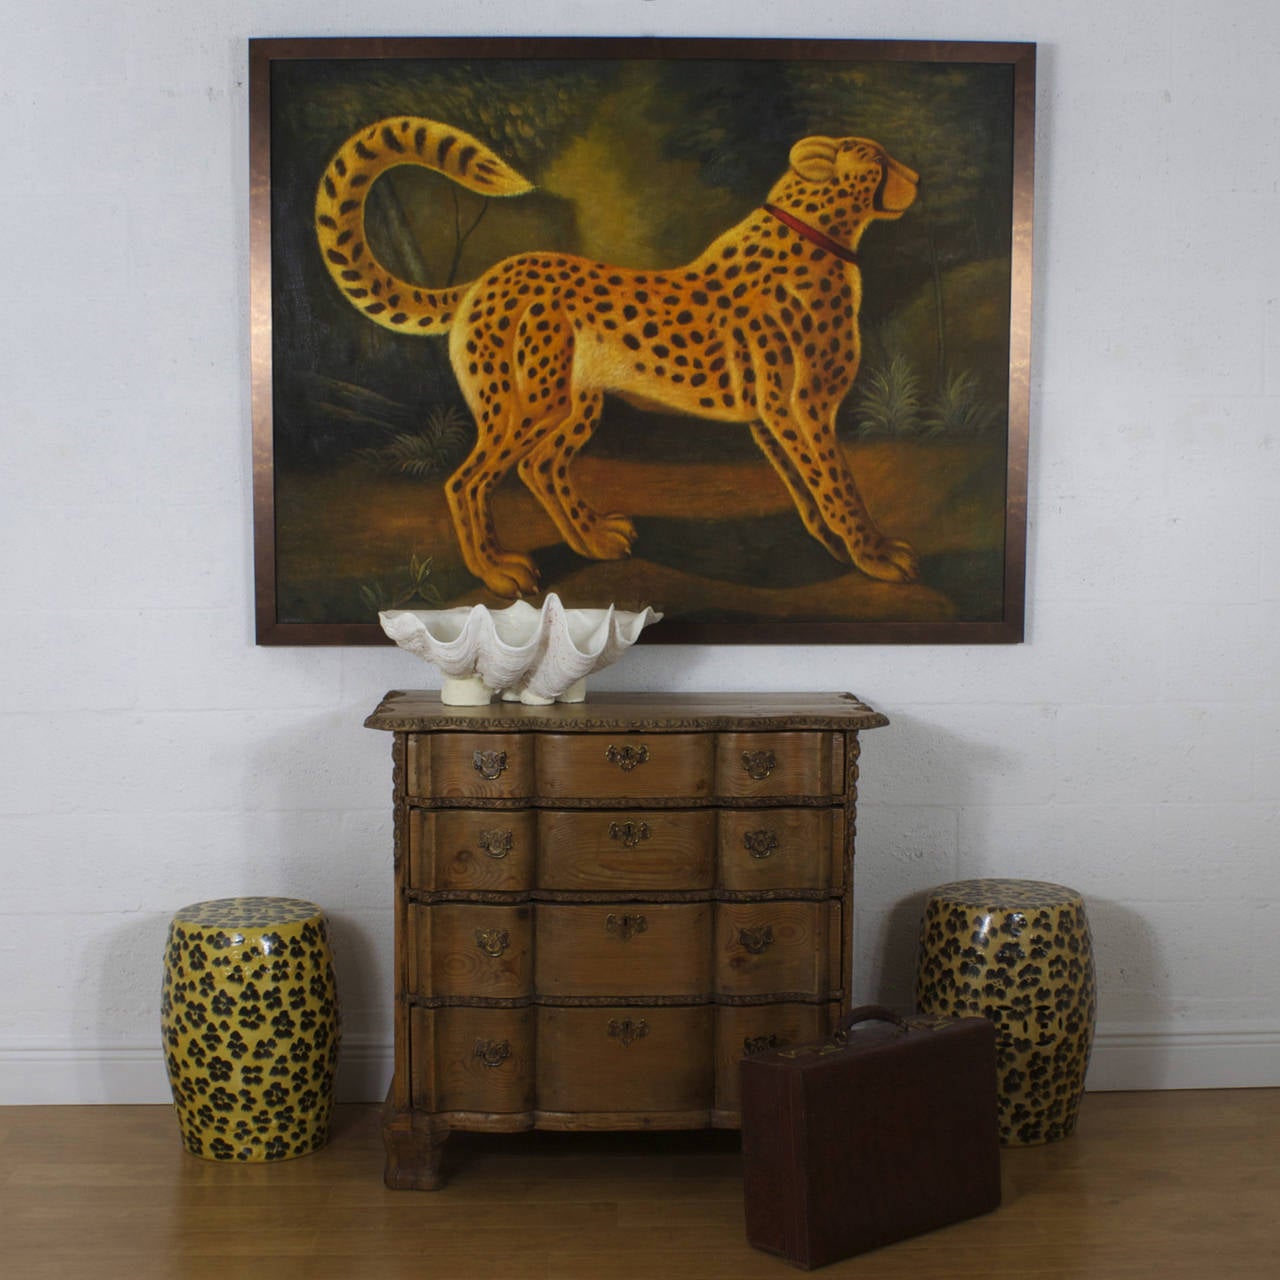 A large dramatic oil painting on canvas, of the speedy cheetah, with a rustic, and folk quality. Set against a jungle landscape and signed Reginald Baxter on the lower right, this painting has a contrived aged look with crackled varnish that was